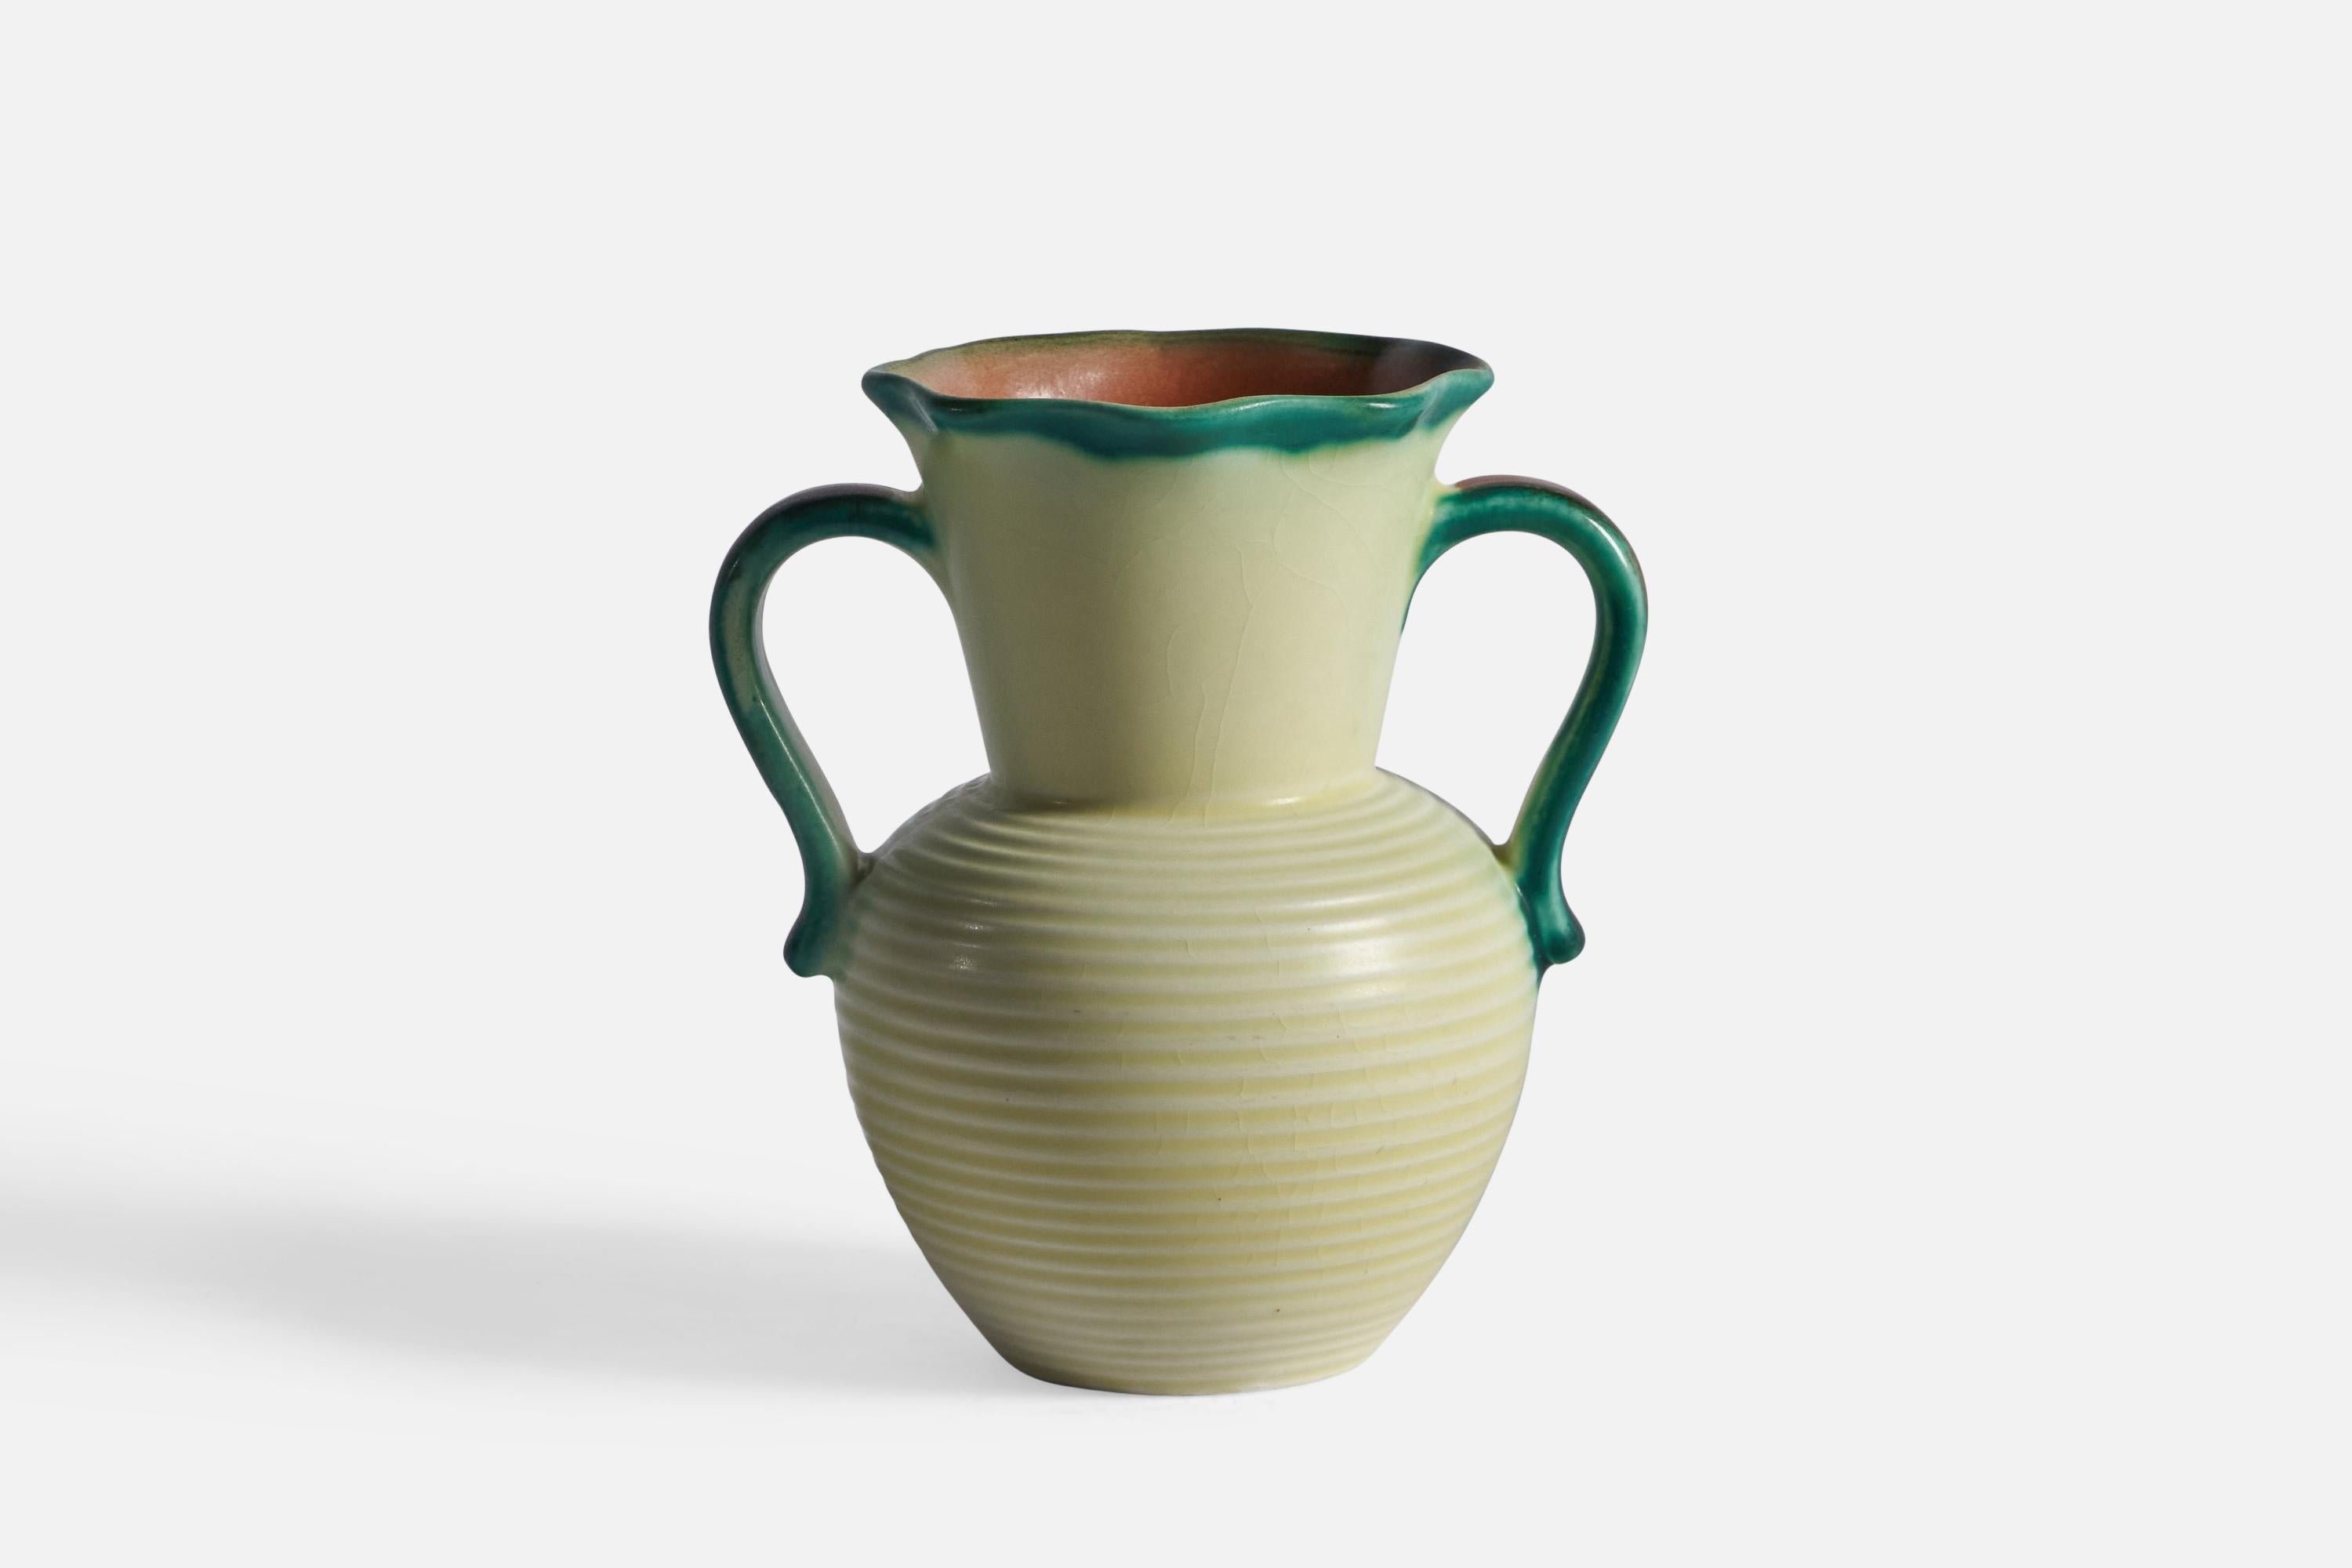 A green and yellow-glazed stoneware vase, designed and produced by Rörstrand, Sweden, 1940s.